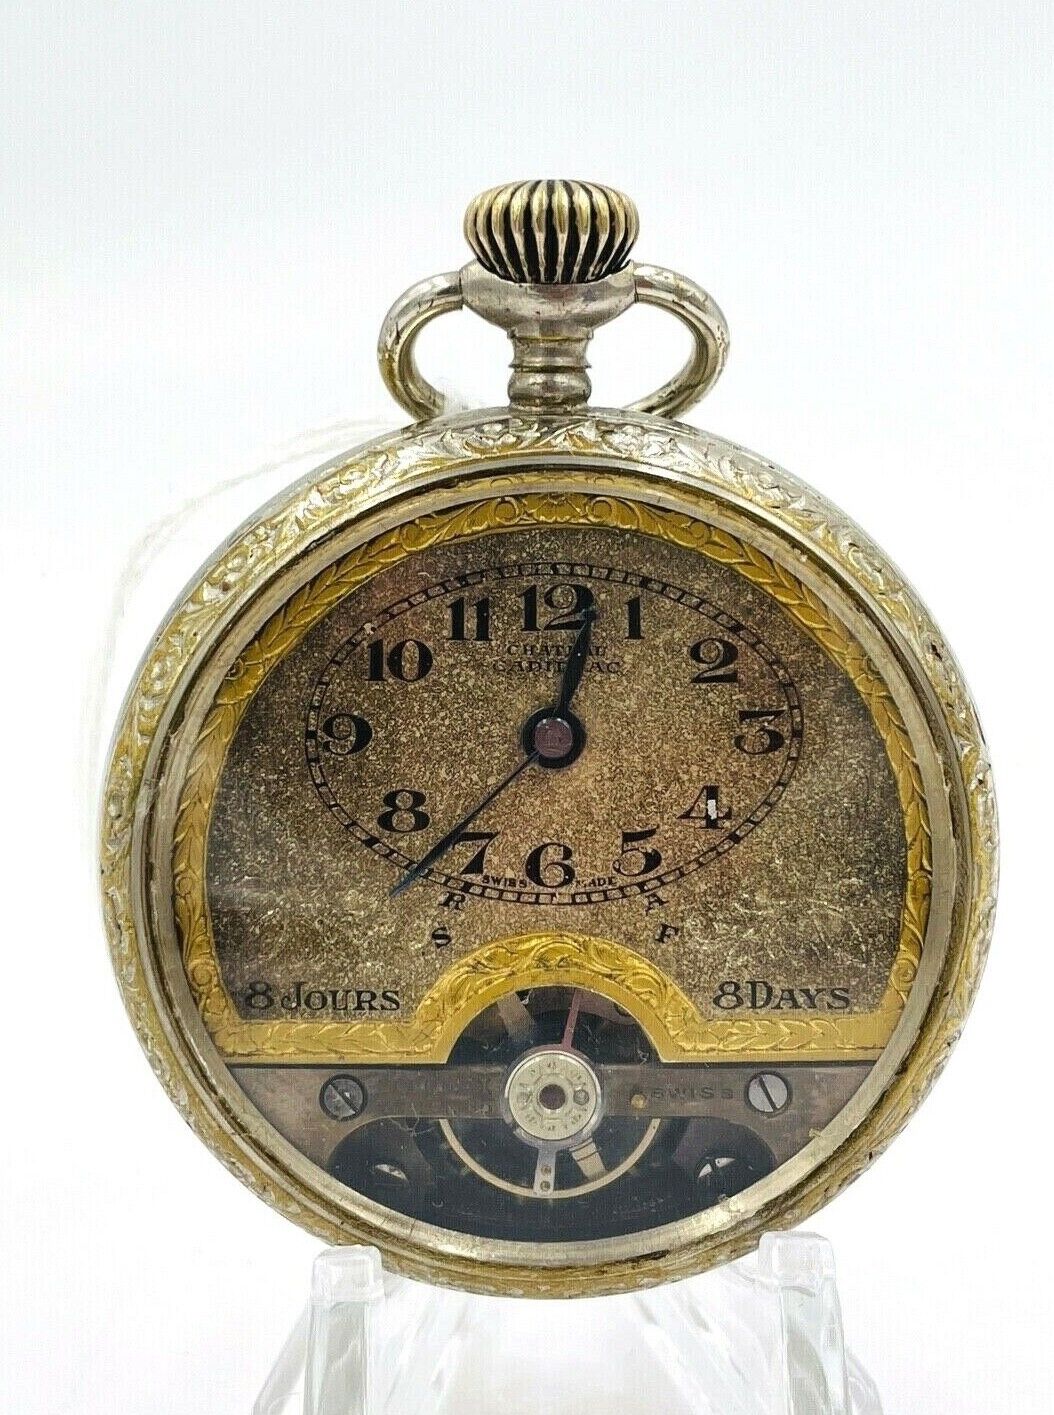 Solomax Chateau Cadillac 8 Day Pocket Watch Openscape Engraved case Rare